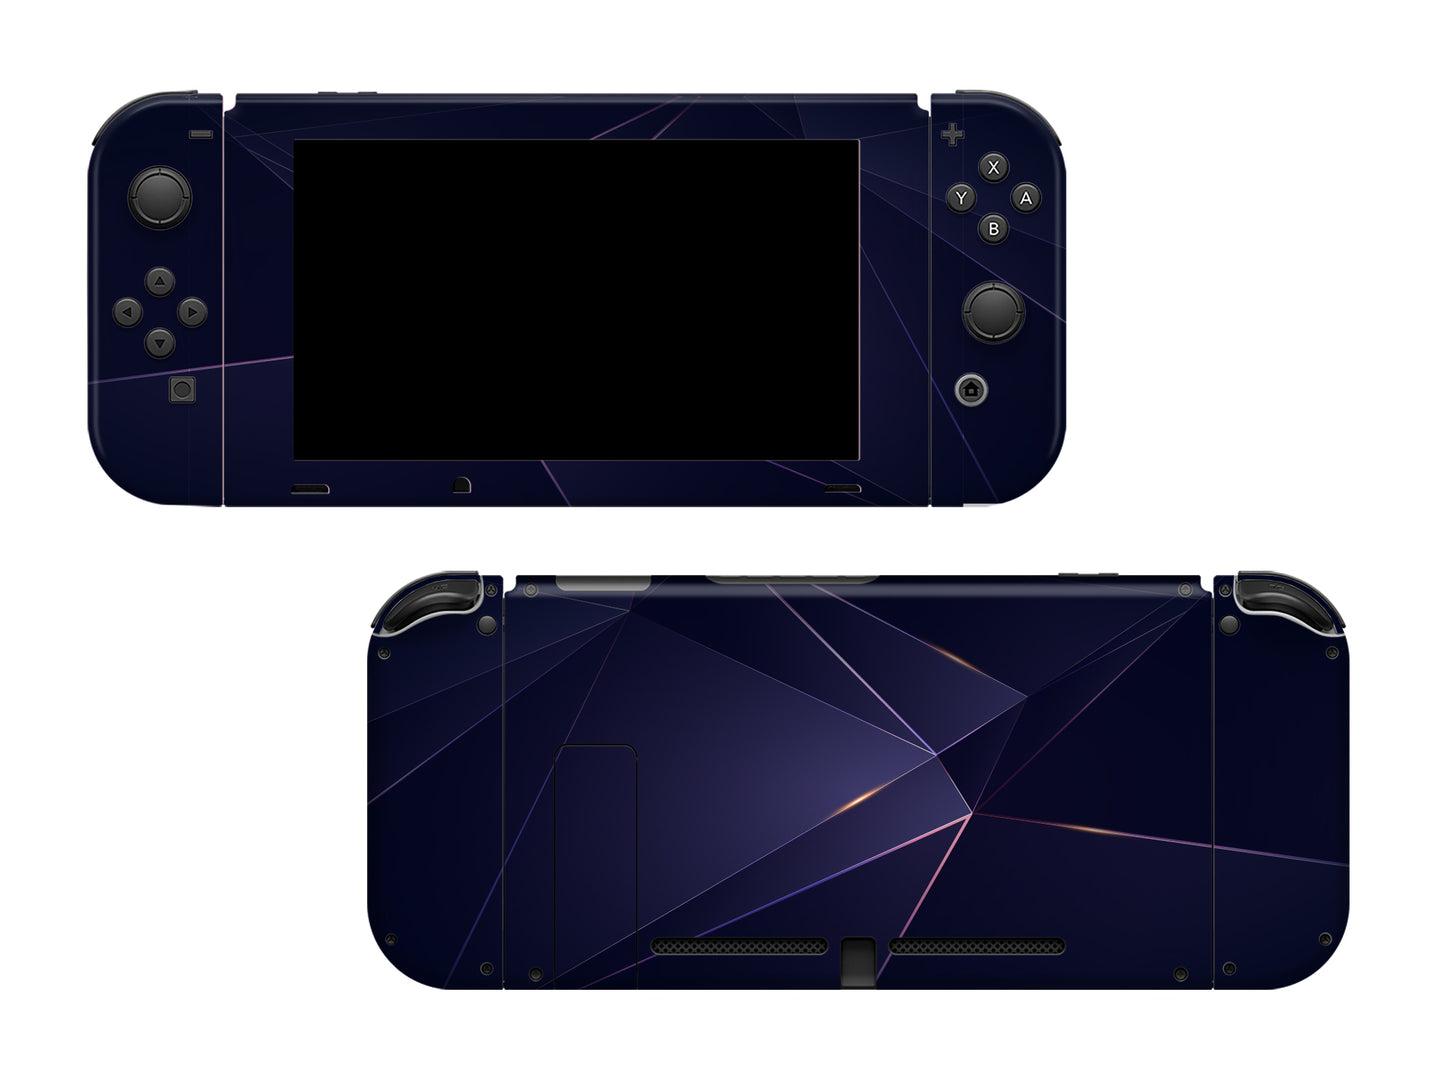 Light and Shadow Effect Full Wrap Vinyl Skin for Nintendo Switch